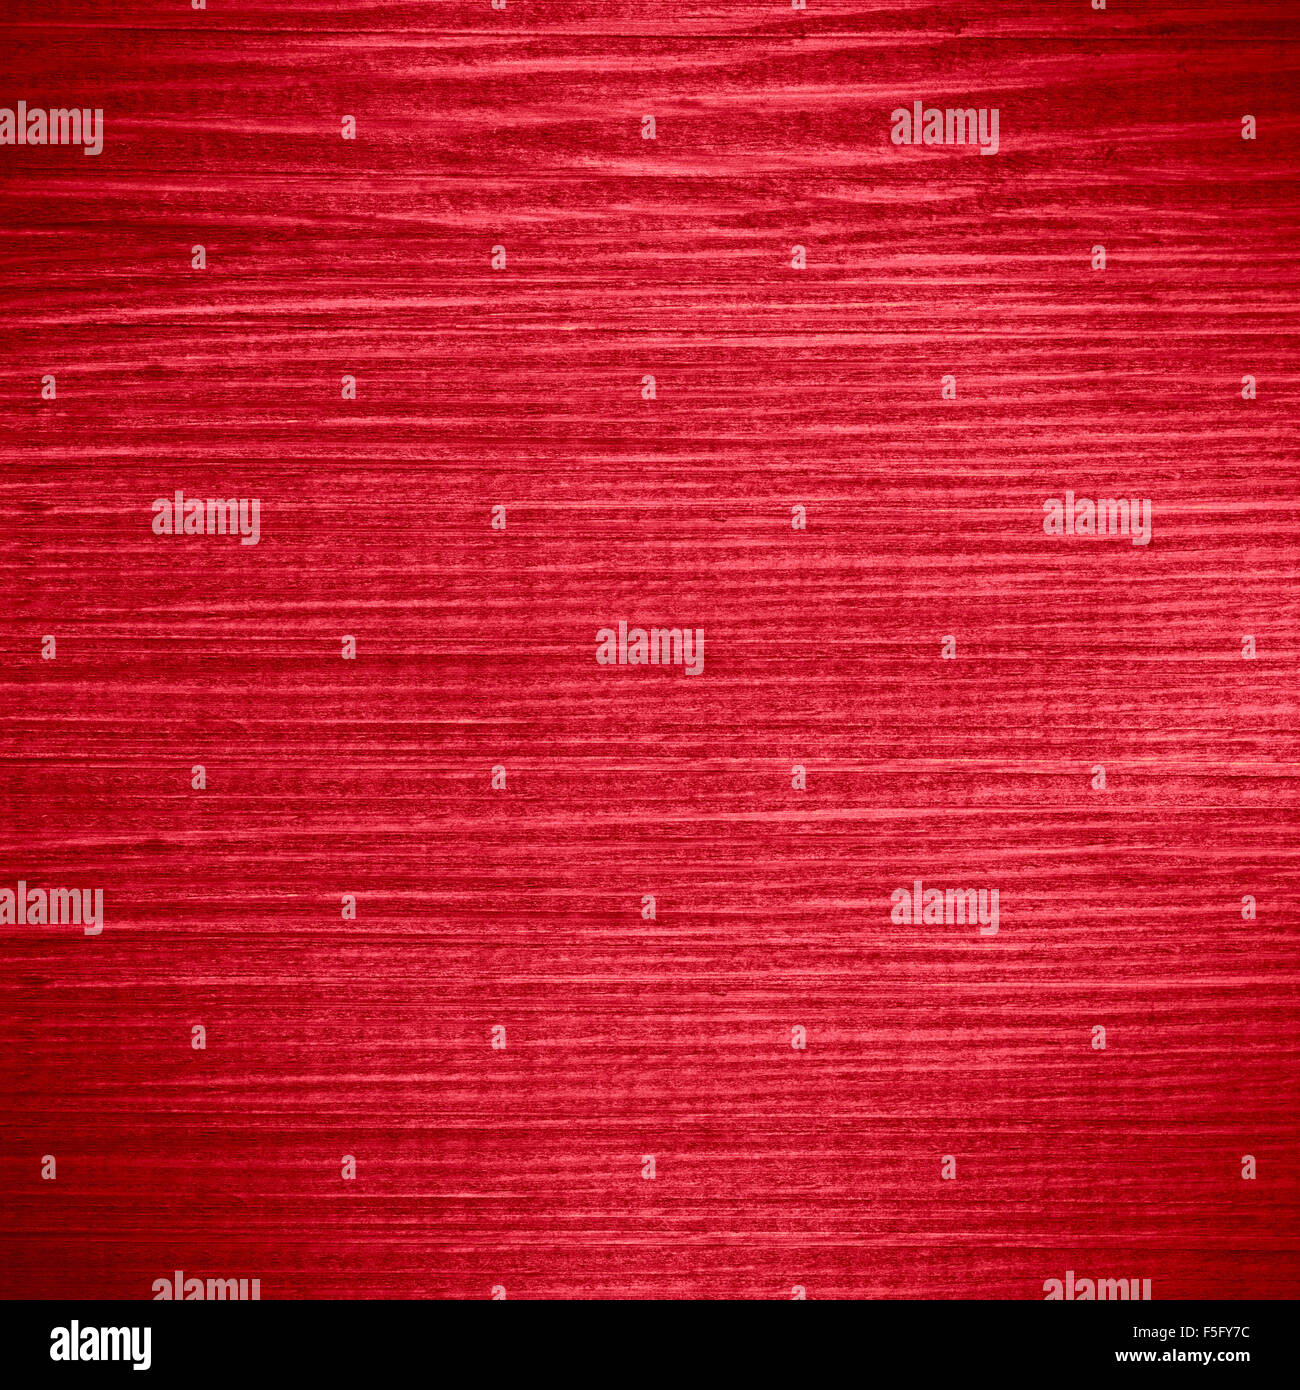 red wooden background or grainy wood grain texture Stock Photo